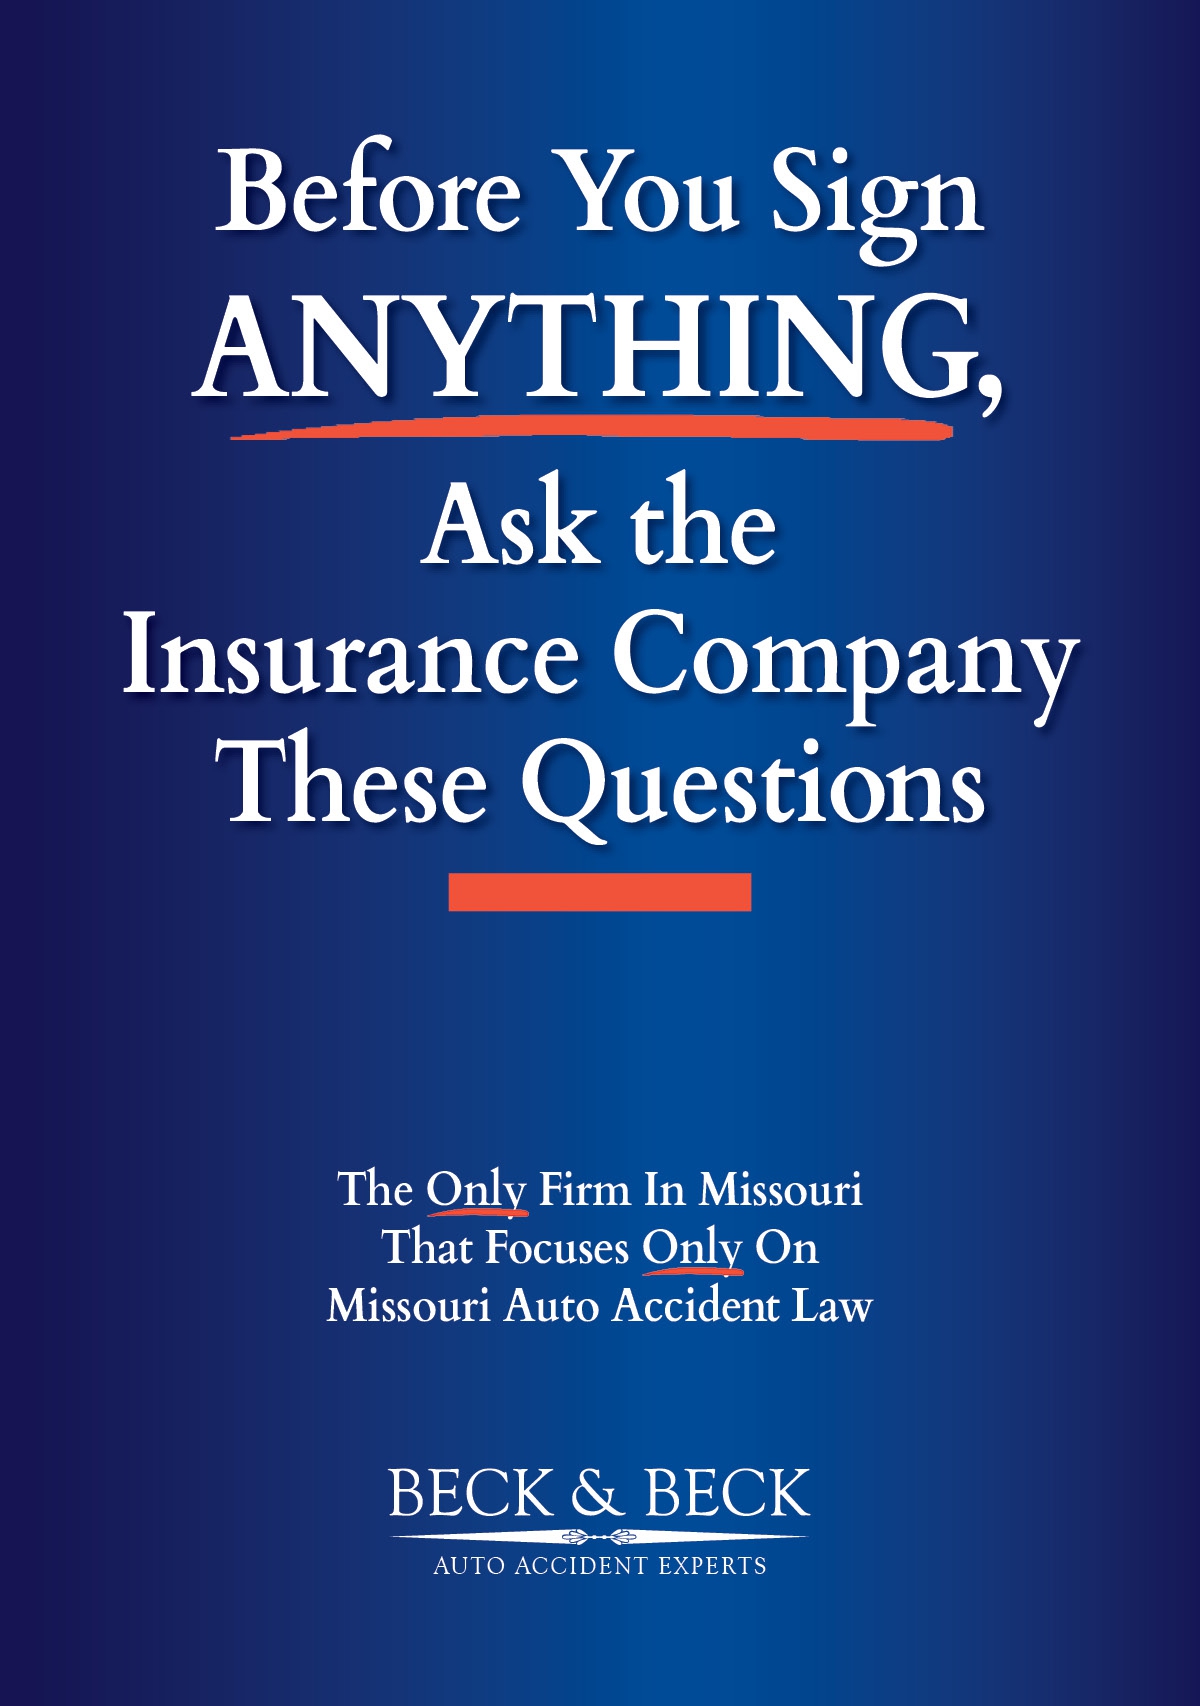 12 Questions to Ask Your Insurance Company Before You Sign Anything